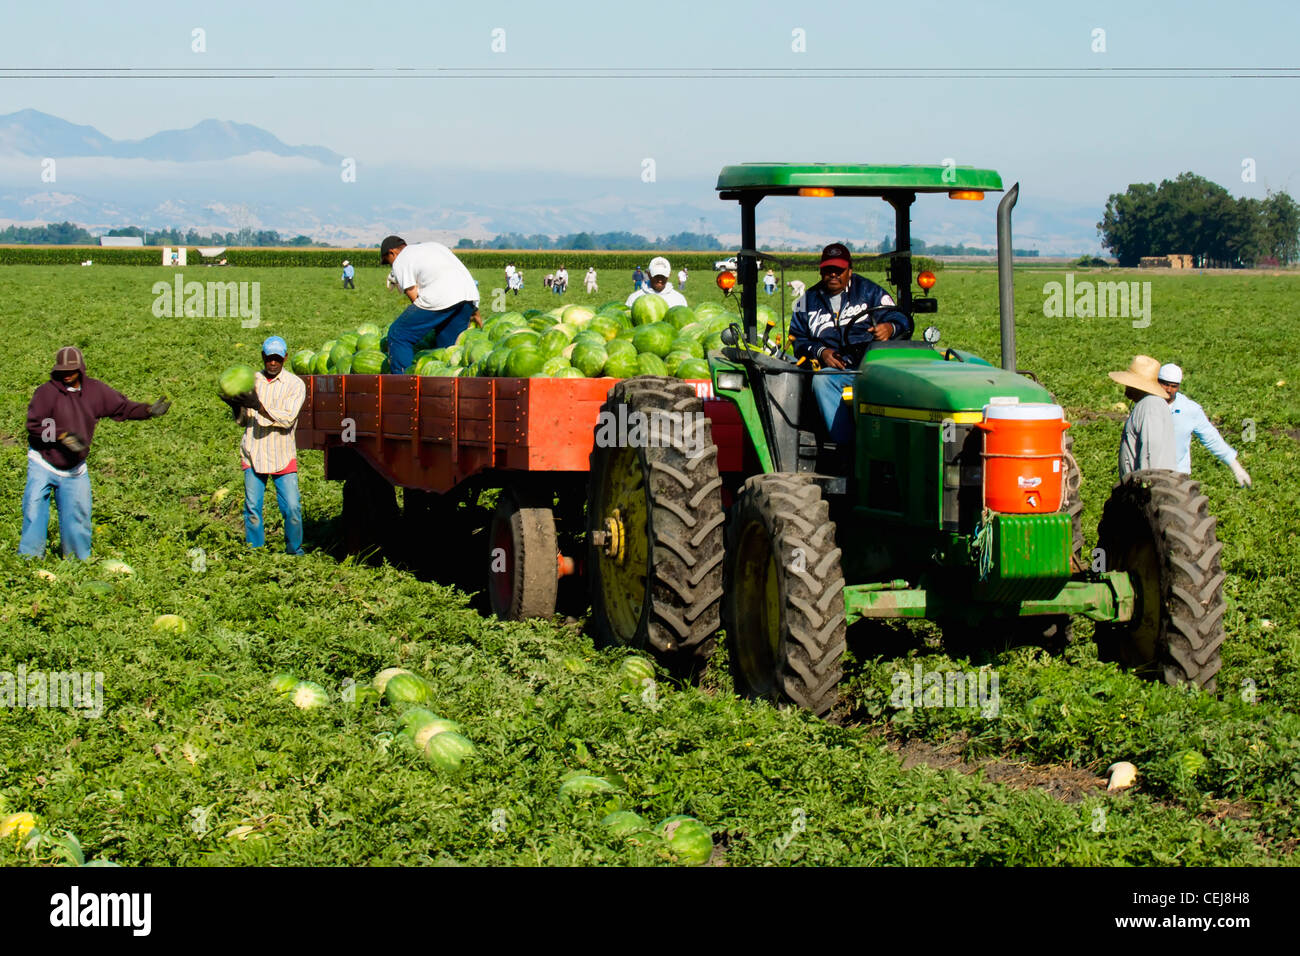 Agriculture - Field workers harvest watermelons and load ...